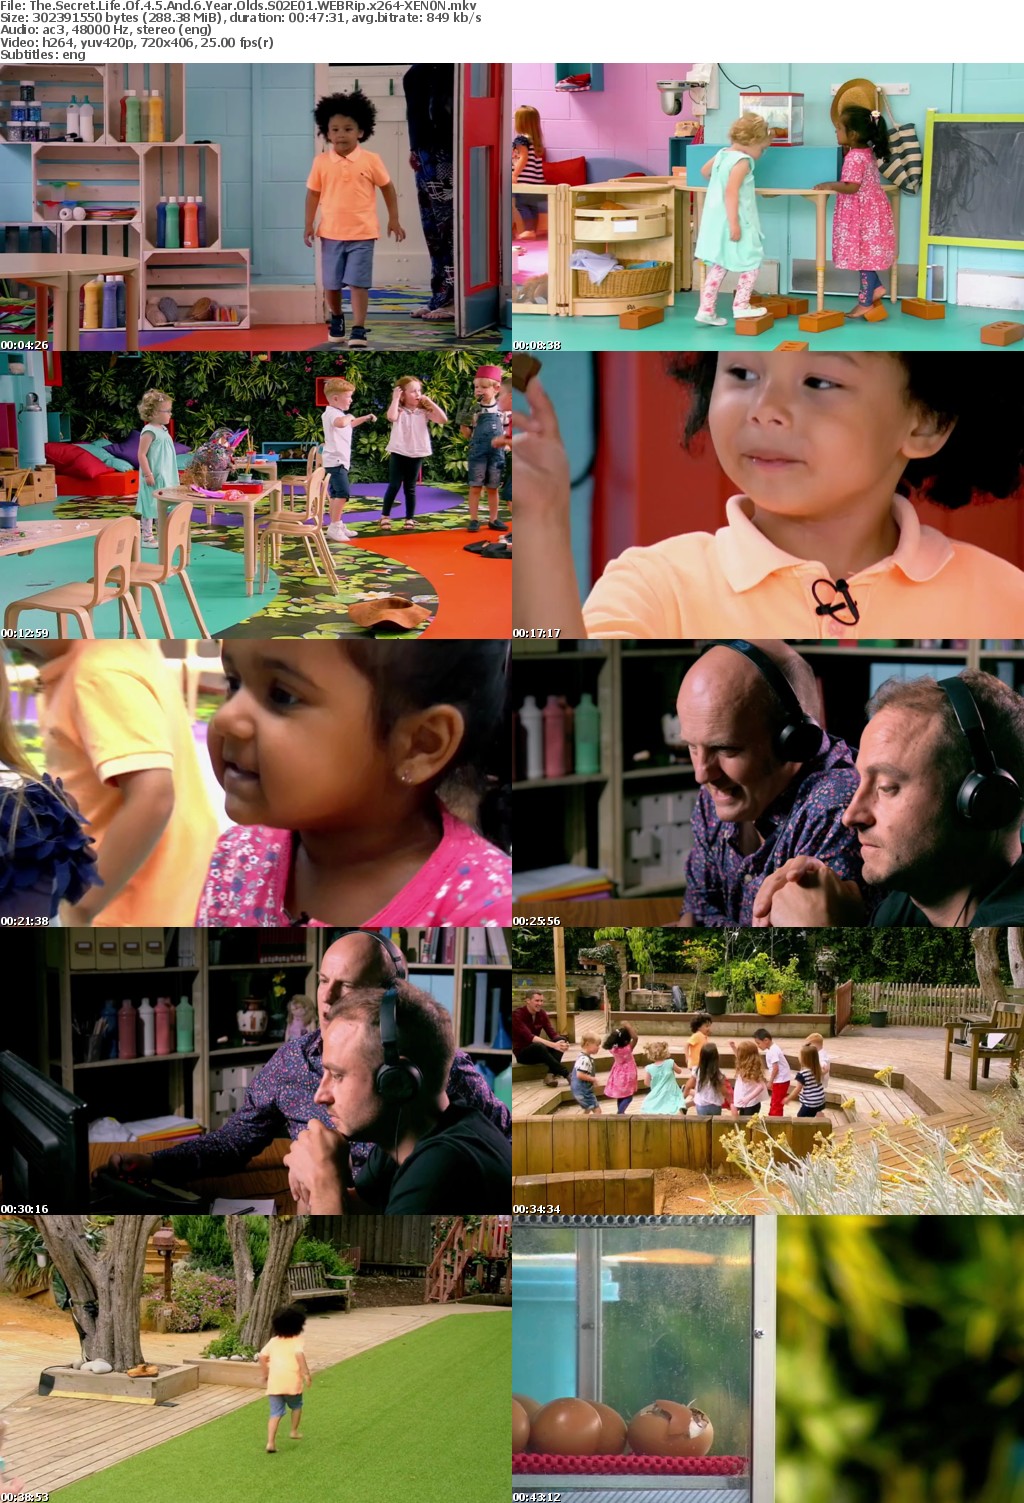 The Secret Life Of 4 5 And 6 Year Olds S02E01 WEBRip x264-XEN0N